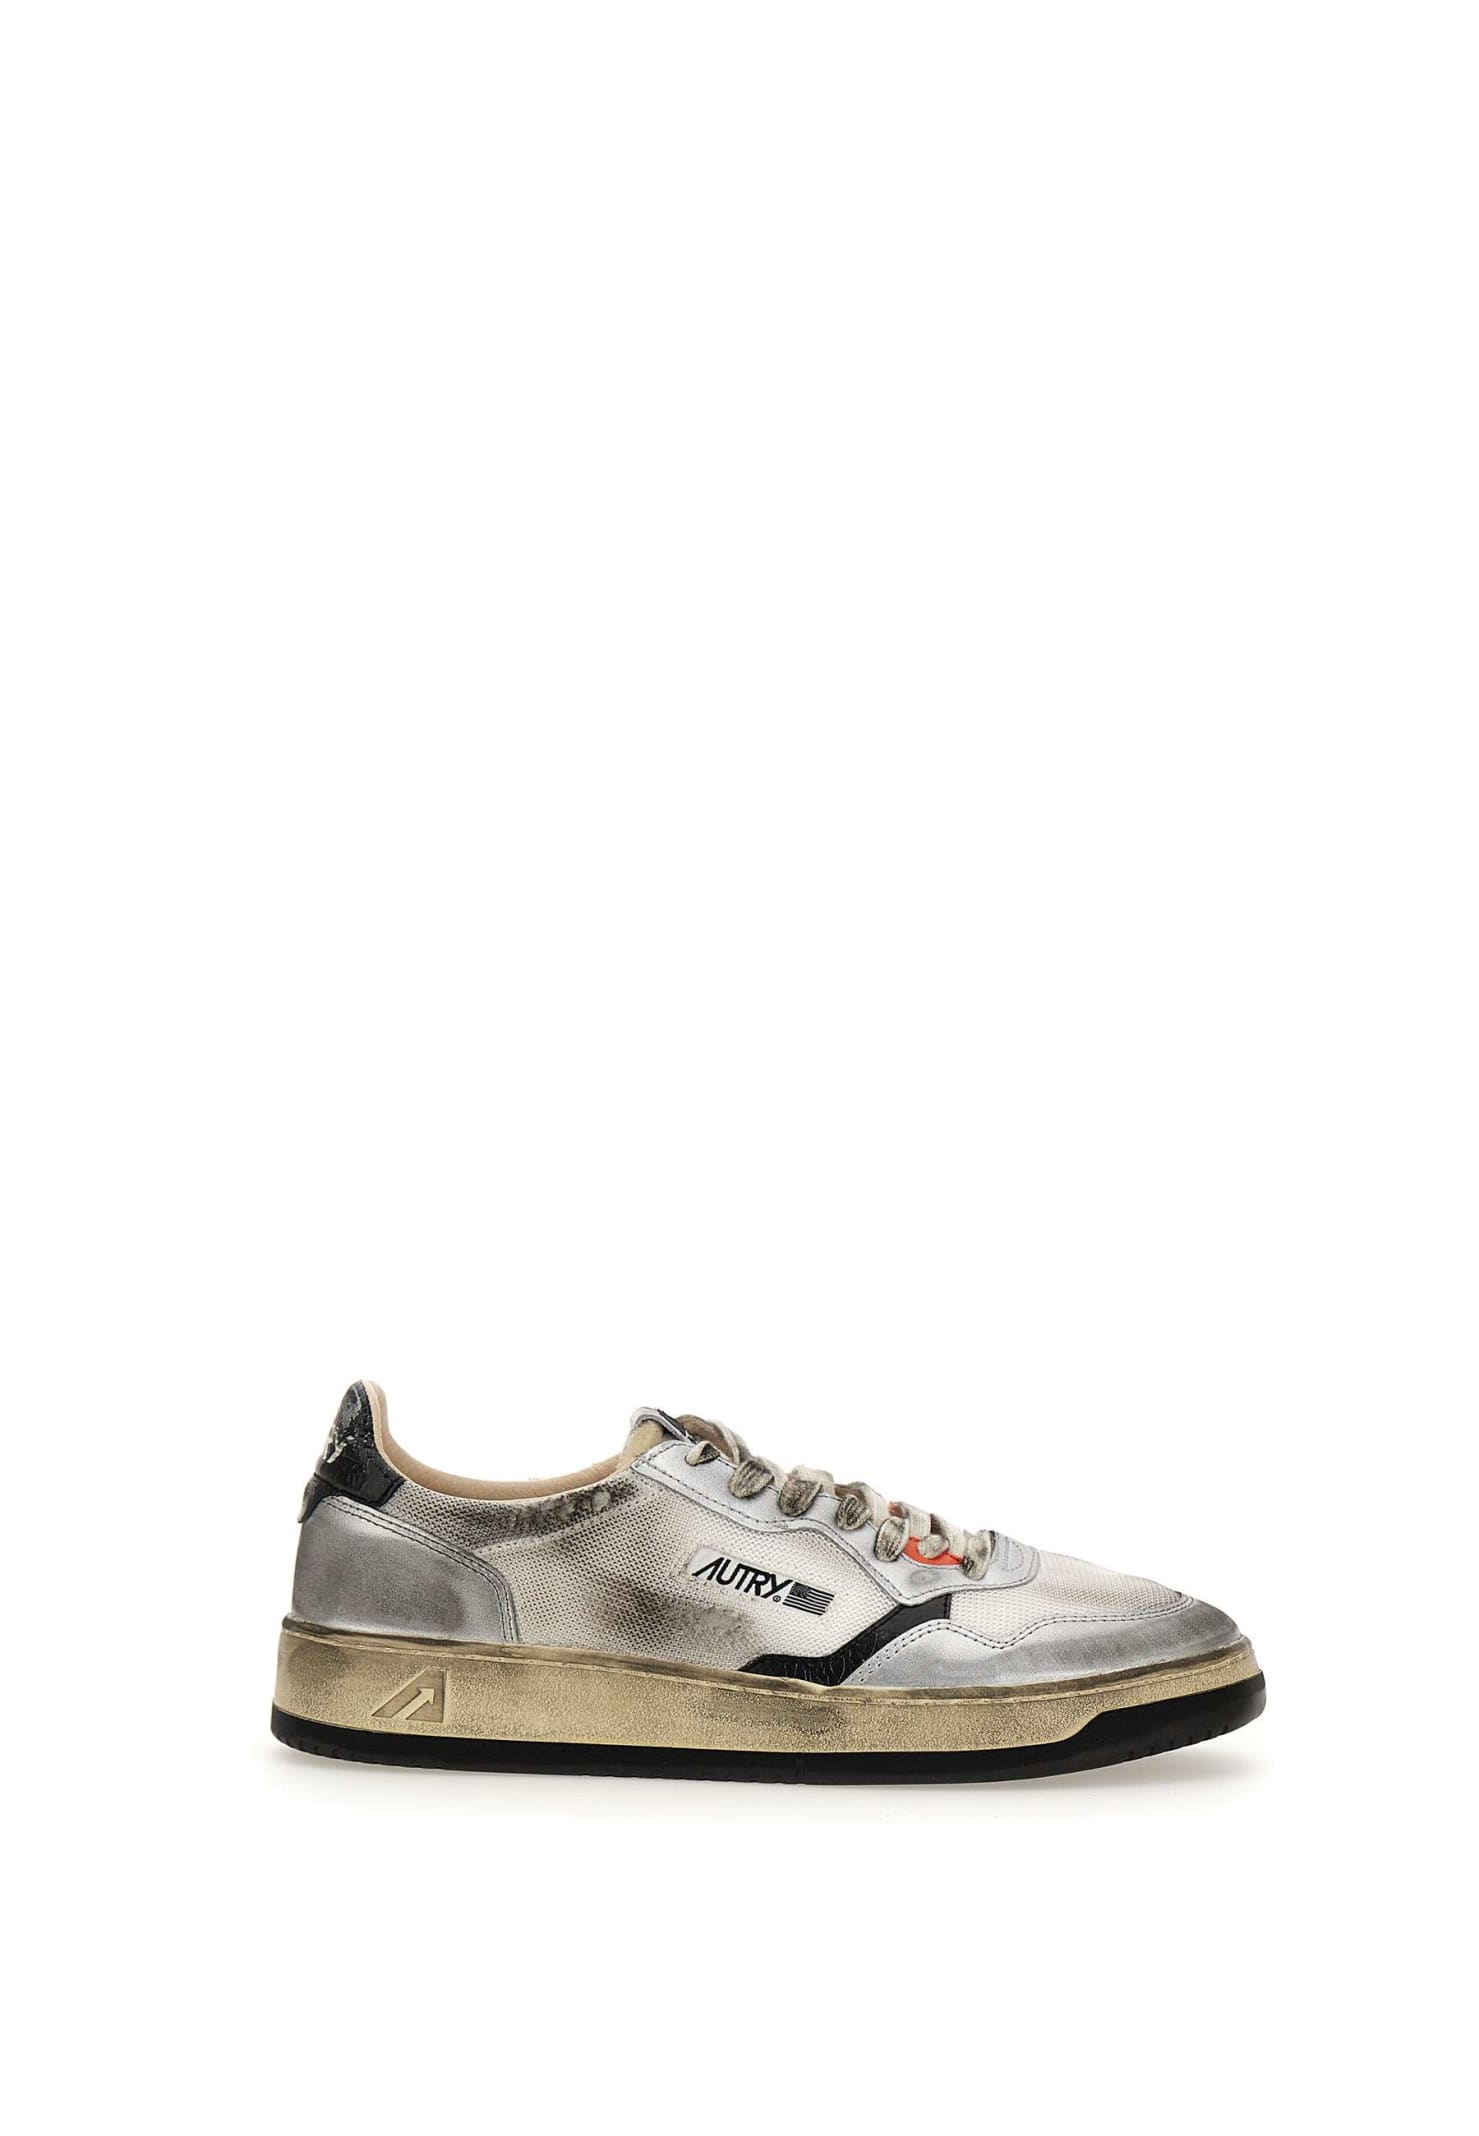 Shop Autry Avlm Ms13 Sneakers In Silver-white